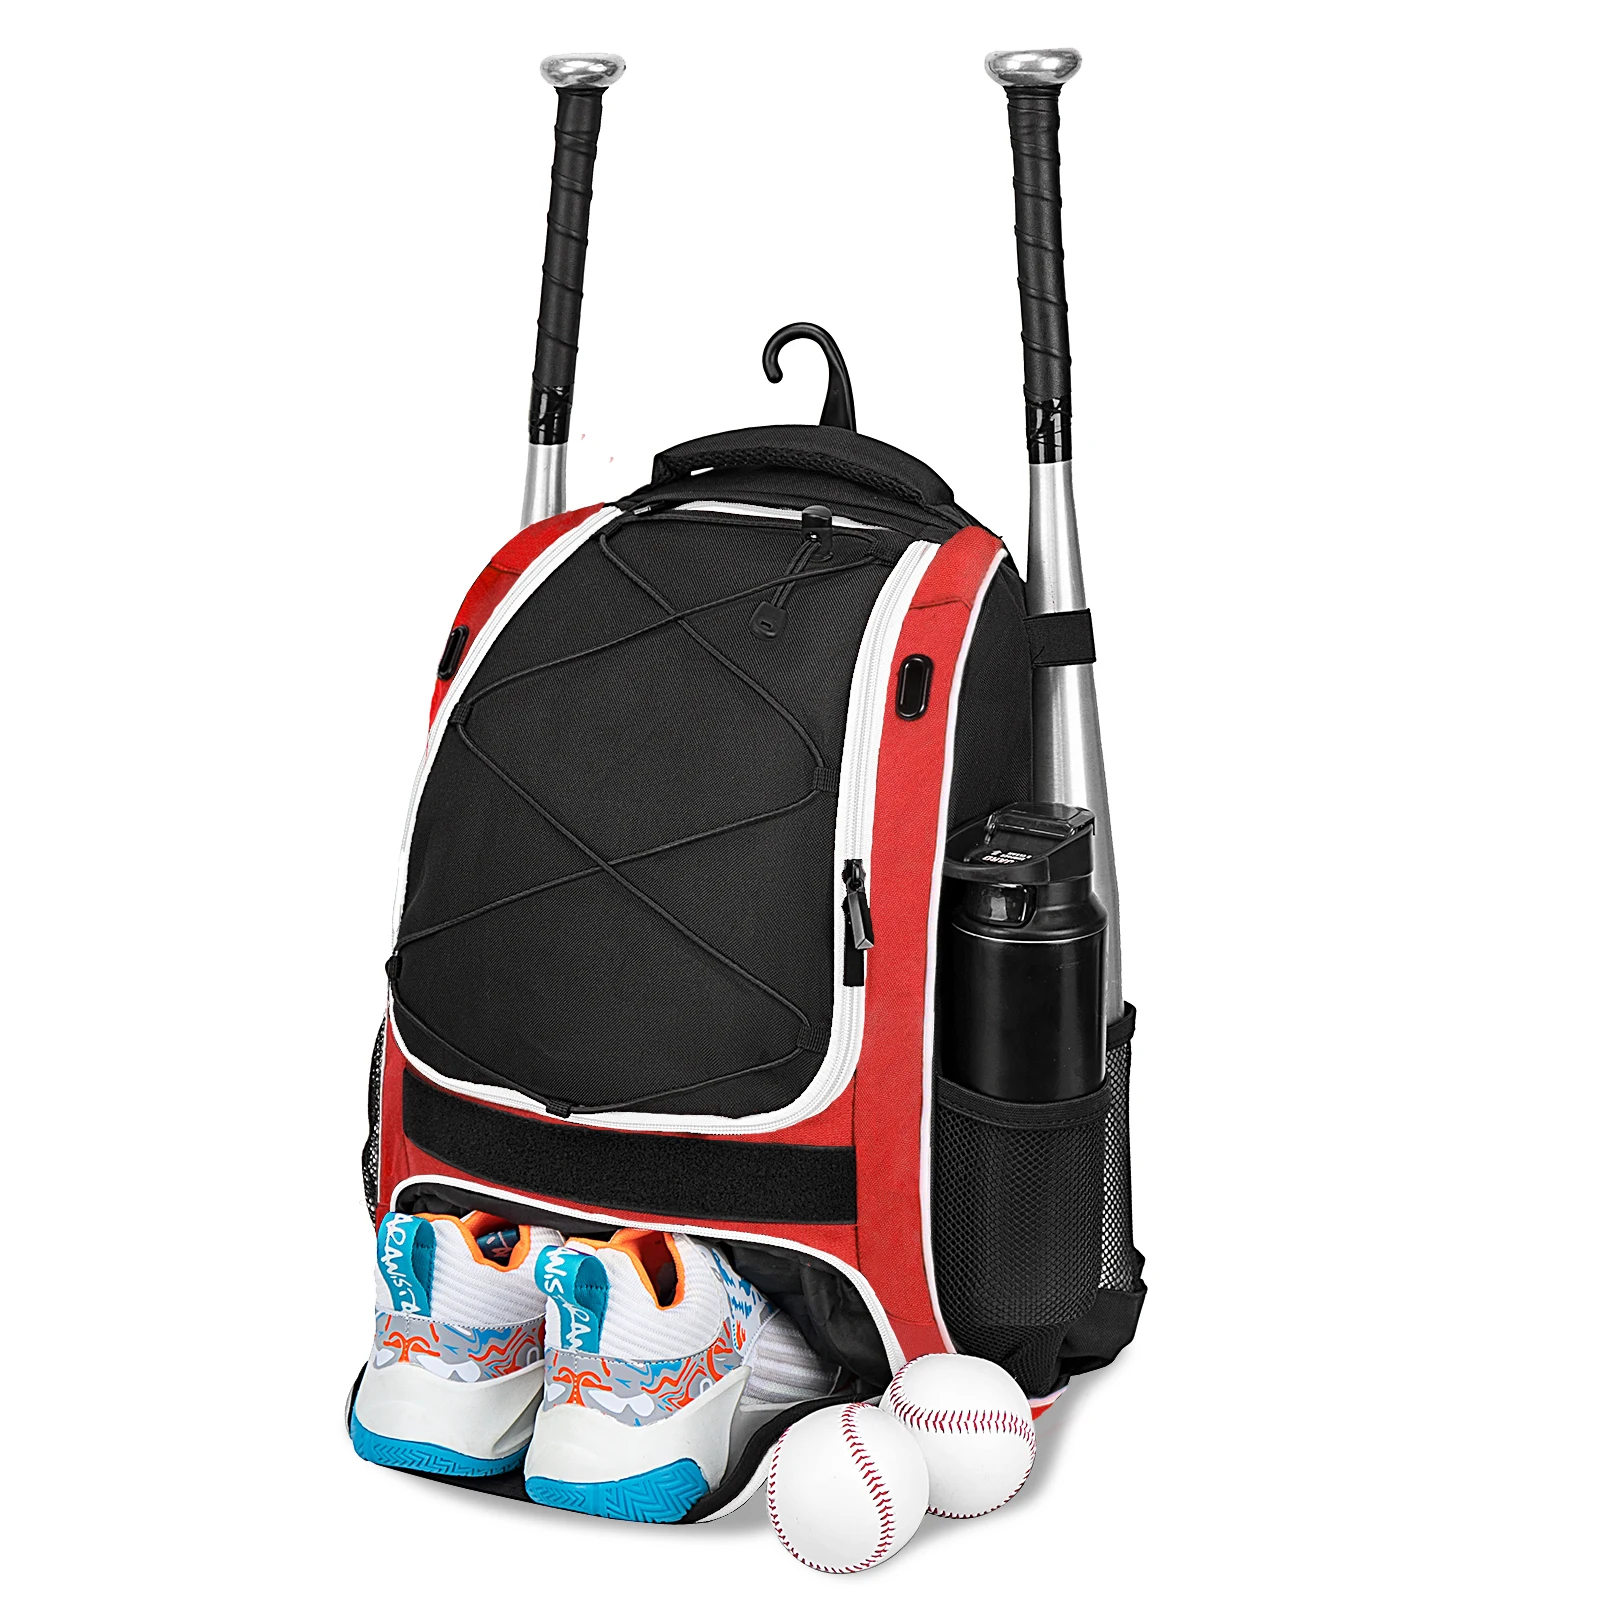 Youth Baseball Bag - Bat Backpack for Softball and T-ball Gear with Separate Shoe Compartment, Adult Softball Bag for Baseball G